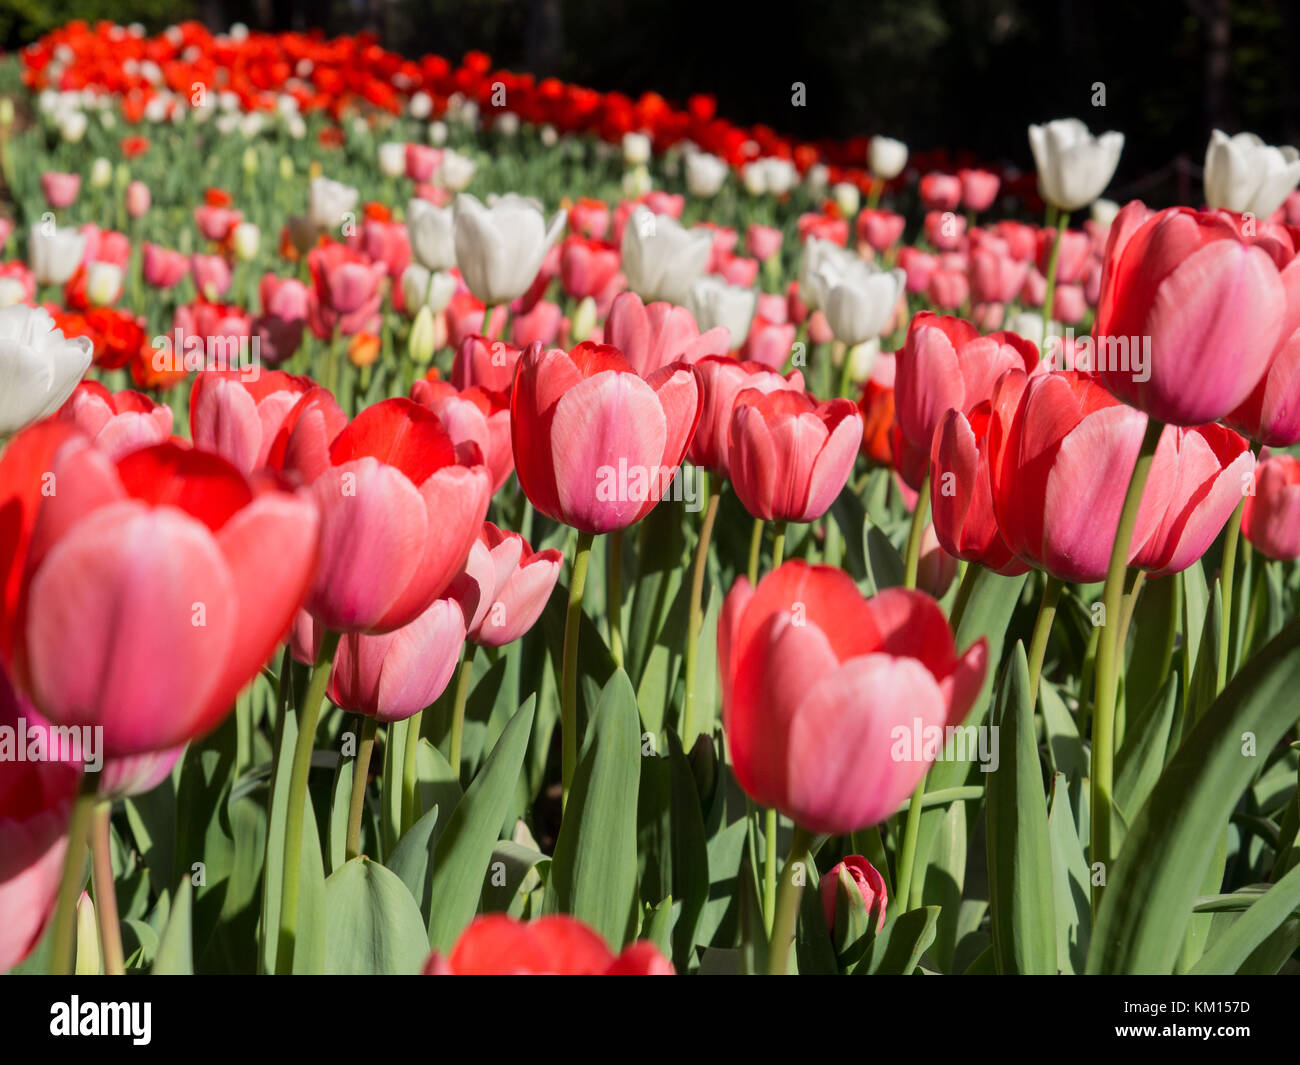 Red pink and white tulips in flower, Araluen Botanical Park, Western Australia Stock Photo